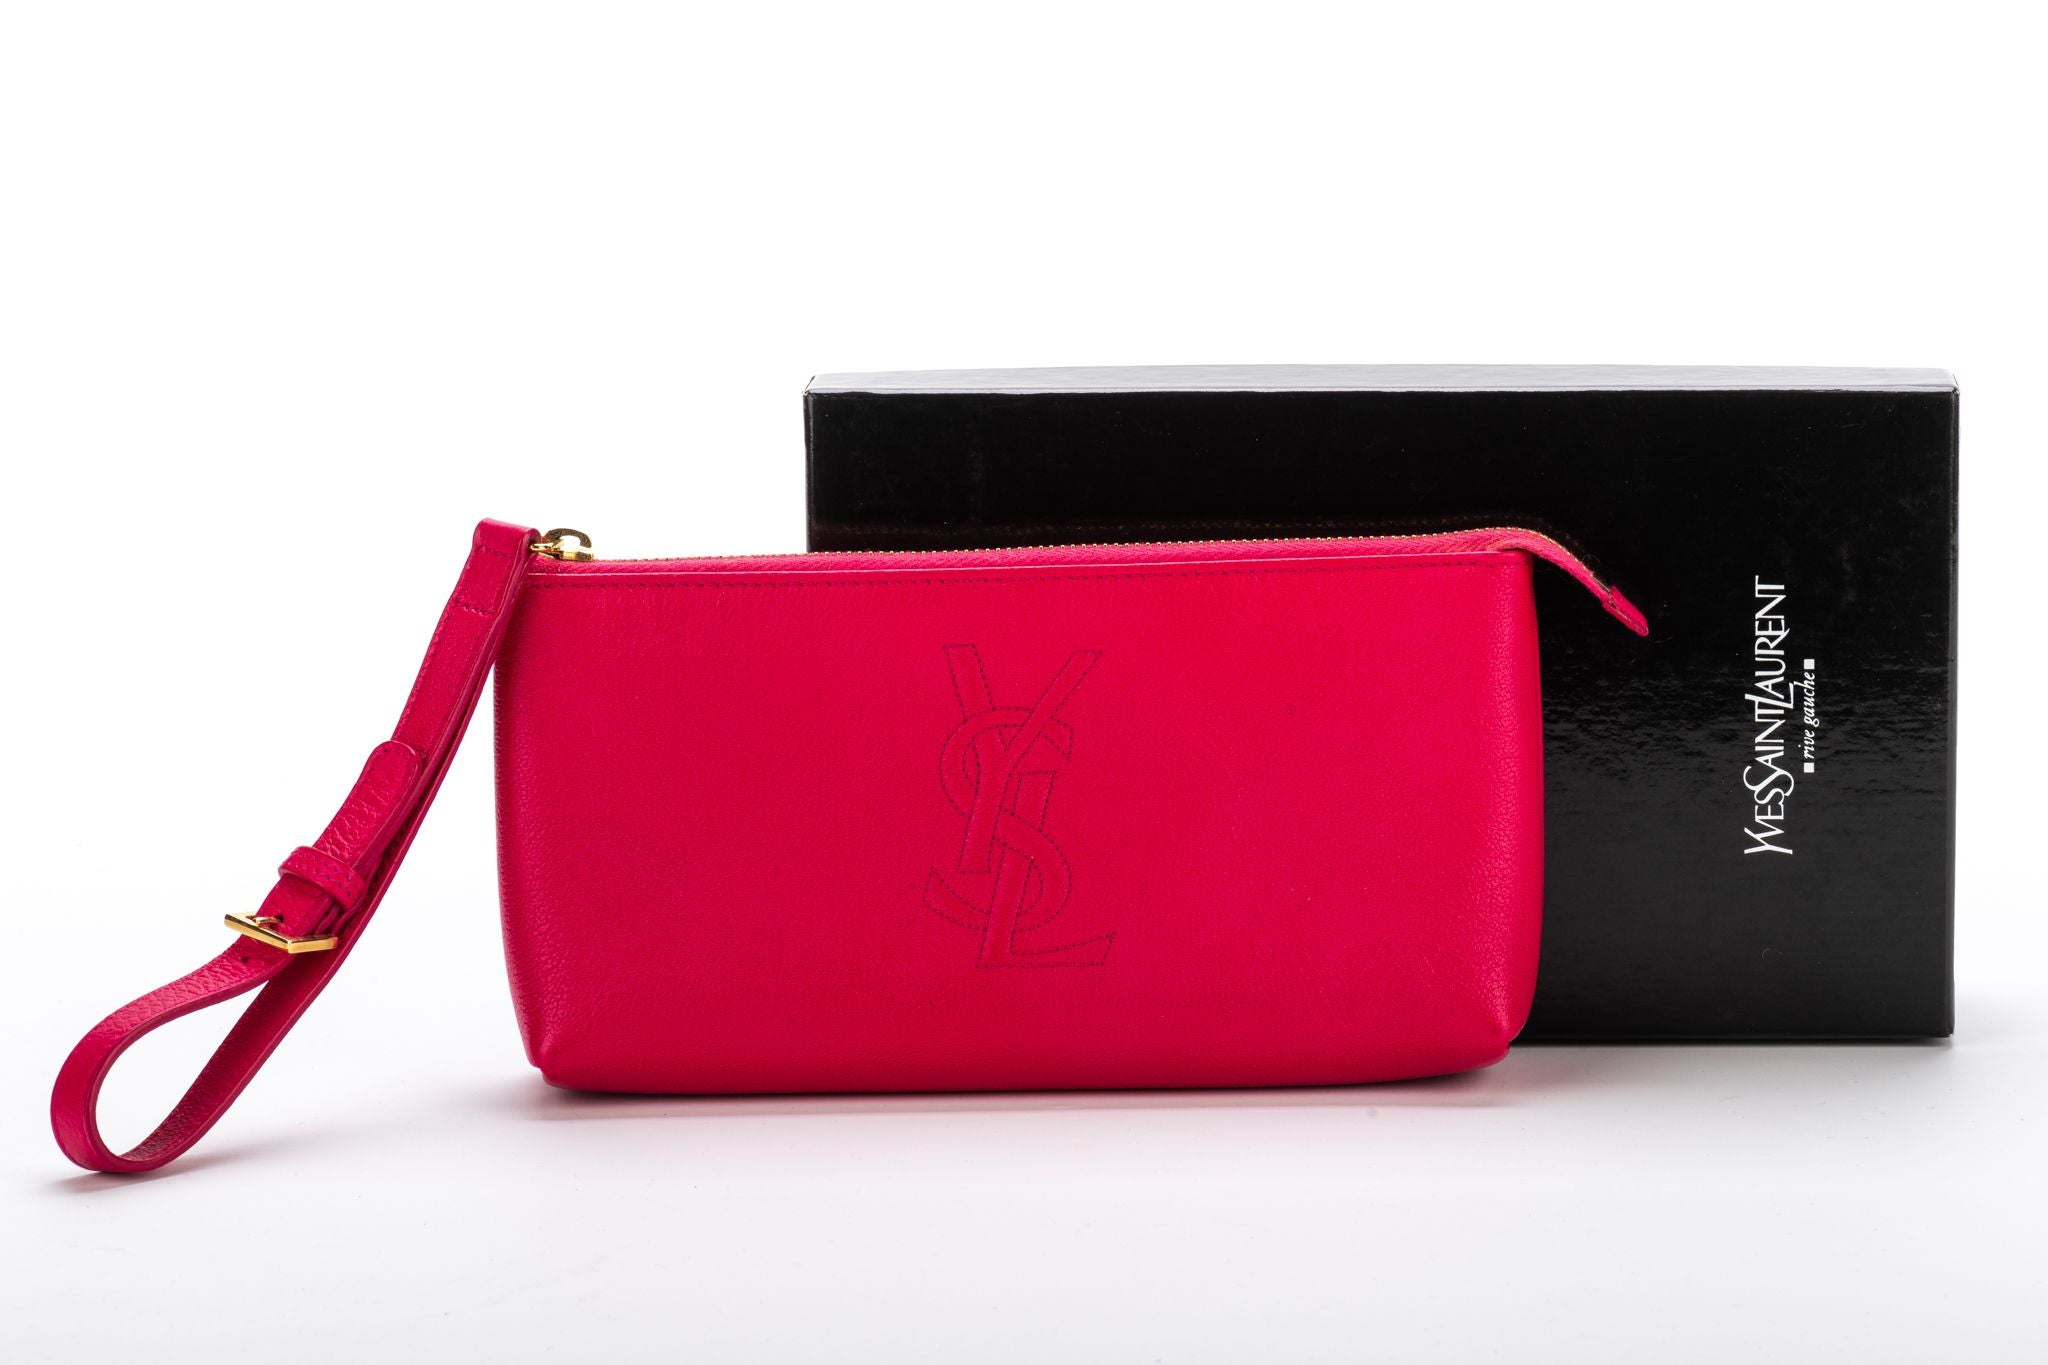 Saint Laurent YSL Monogram Large Pouch in Smooth Leather | Neiman Marcus